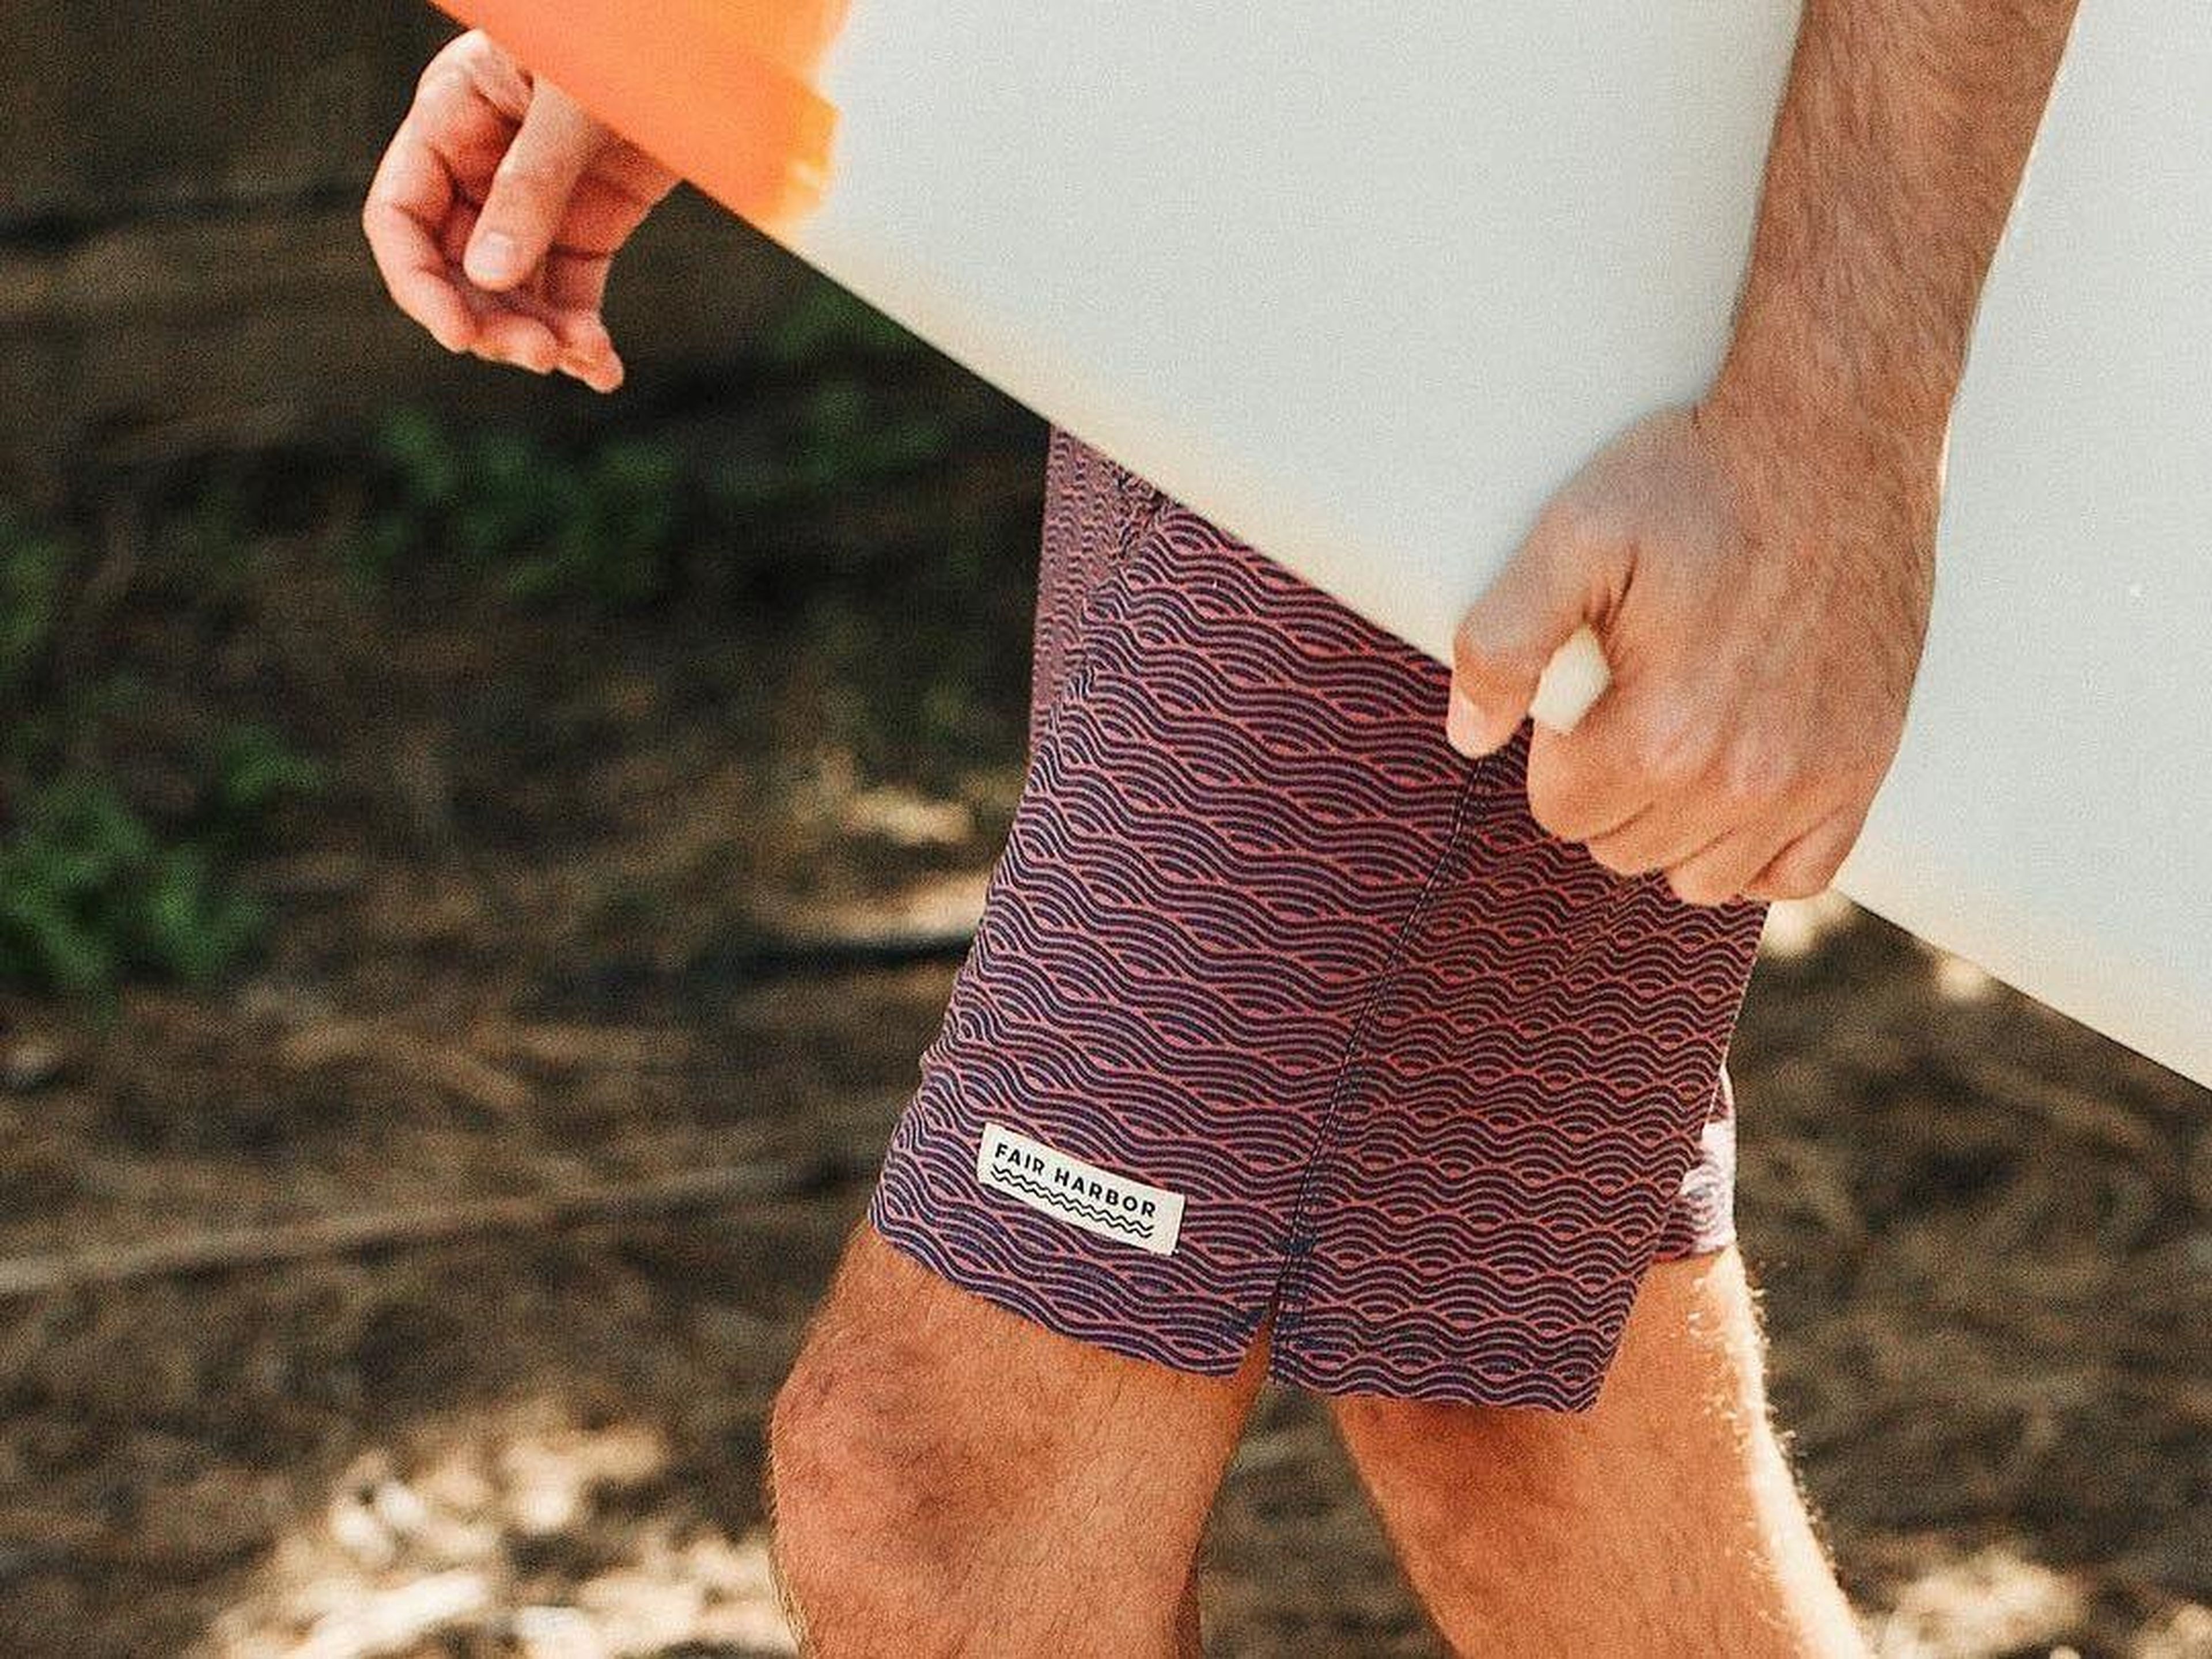 For now, Fair Harbor only makes board shorts, but it hopes to expand its selection in the coming months.